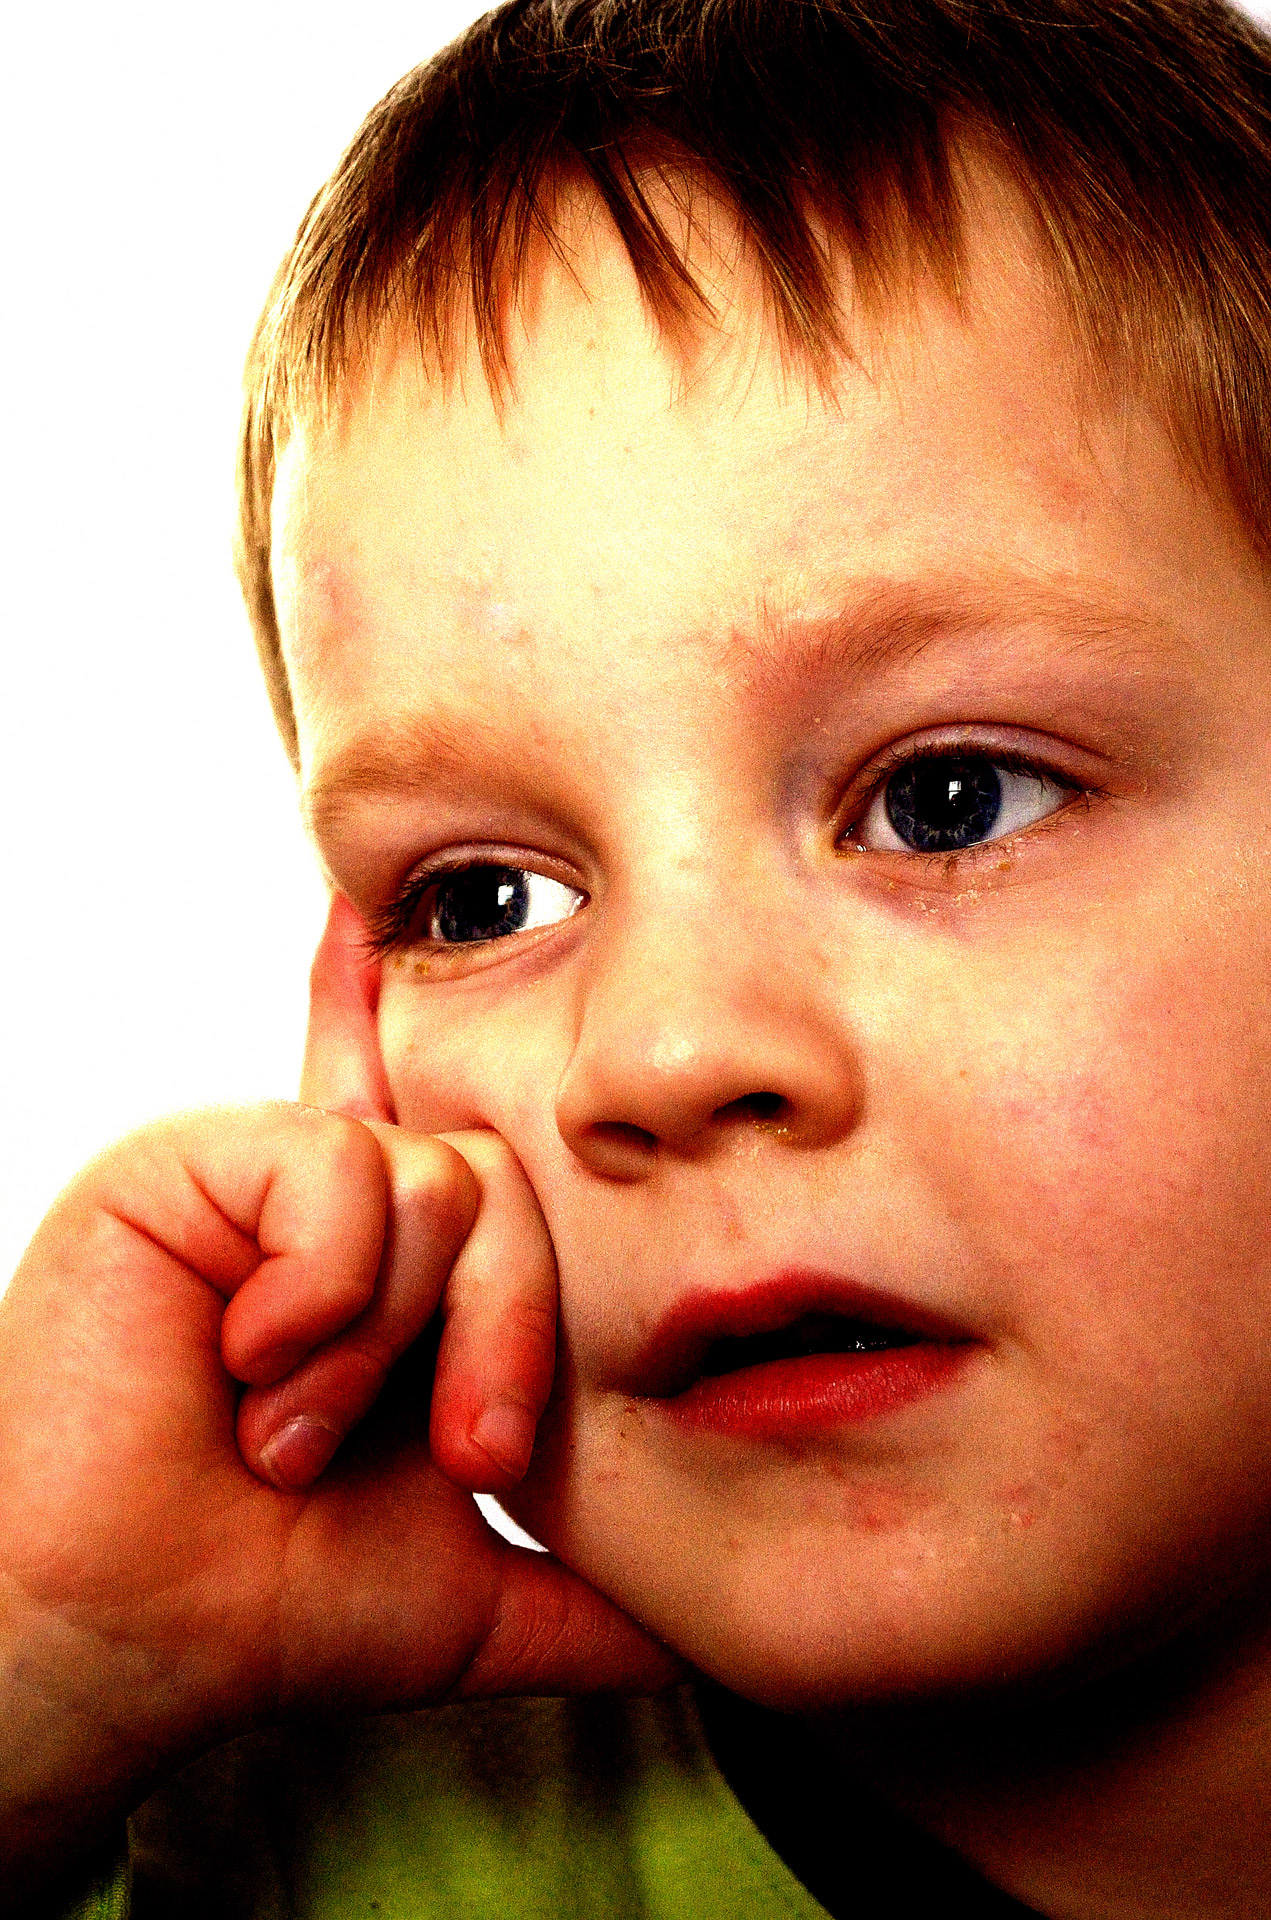 Thoughtful Child Free Stock Photo - Public Domain Pictures
